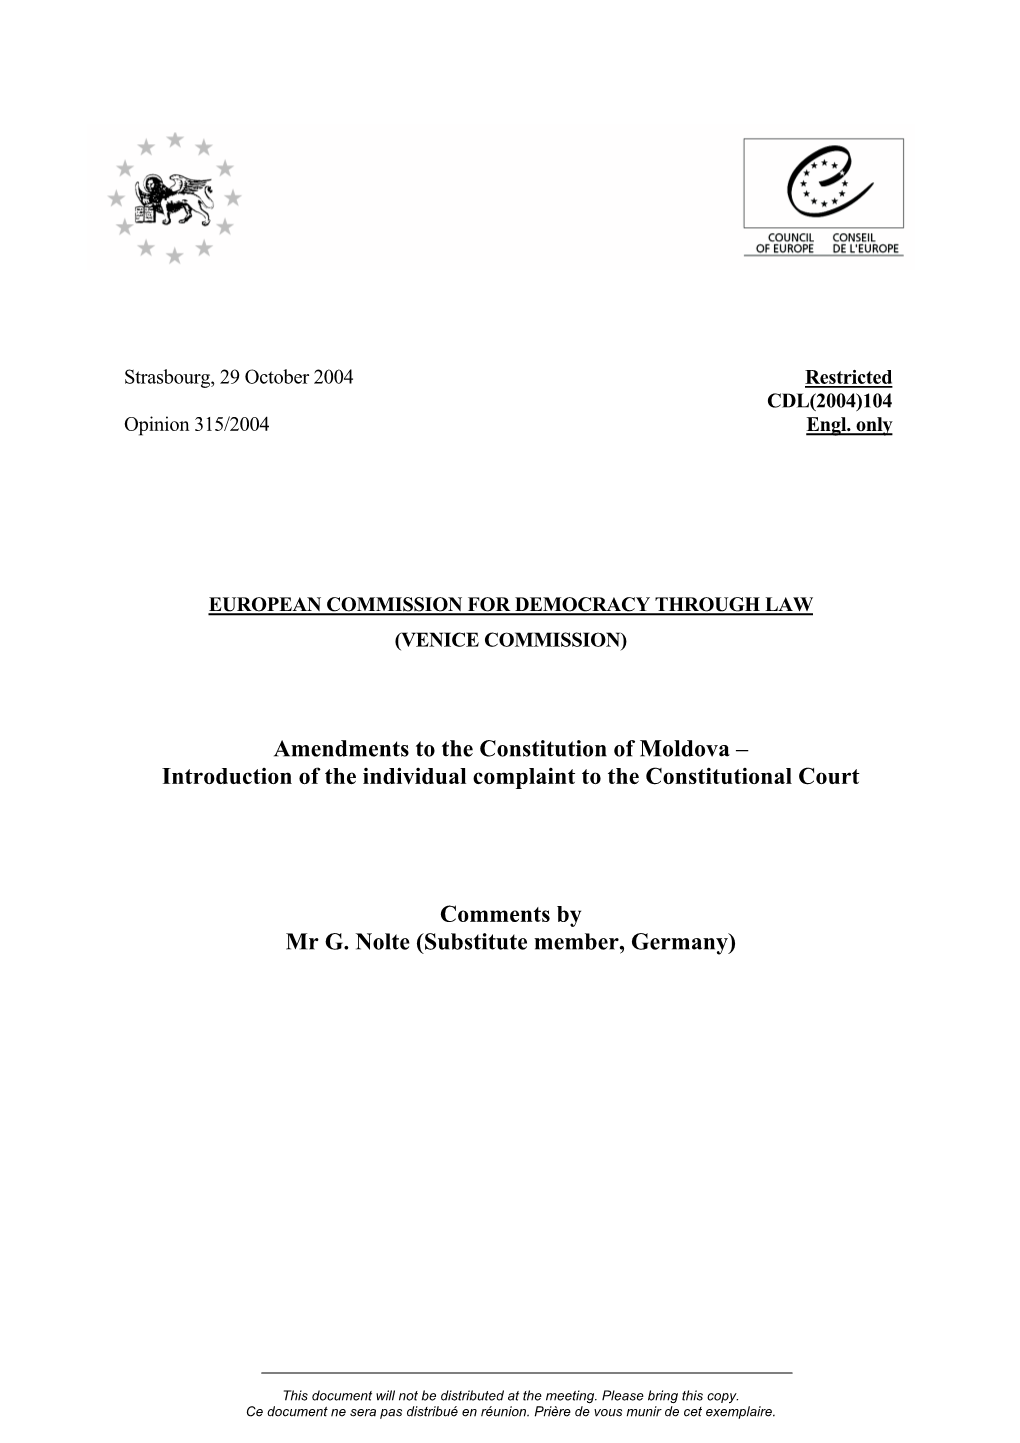 Amendments to the Constitution of Moldova – Introduction of the Individual Complaint to the Constitutional Court